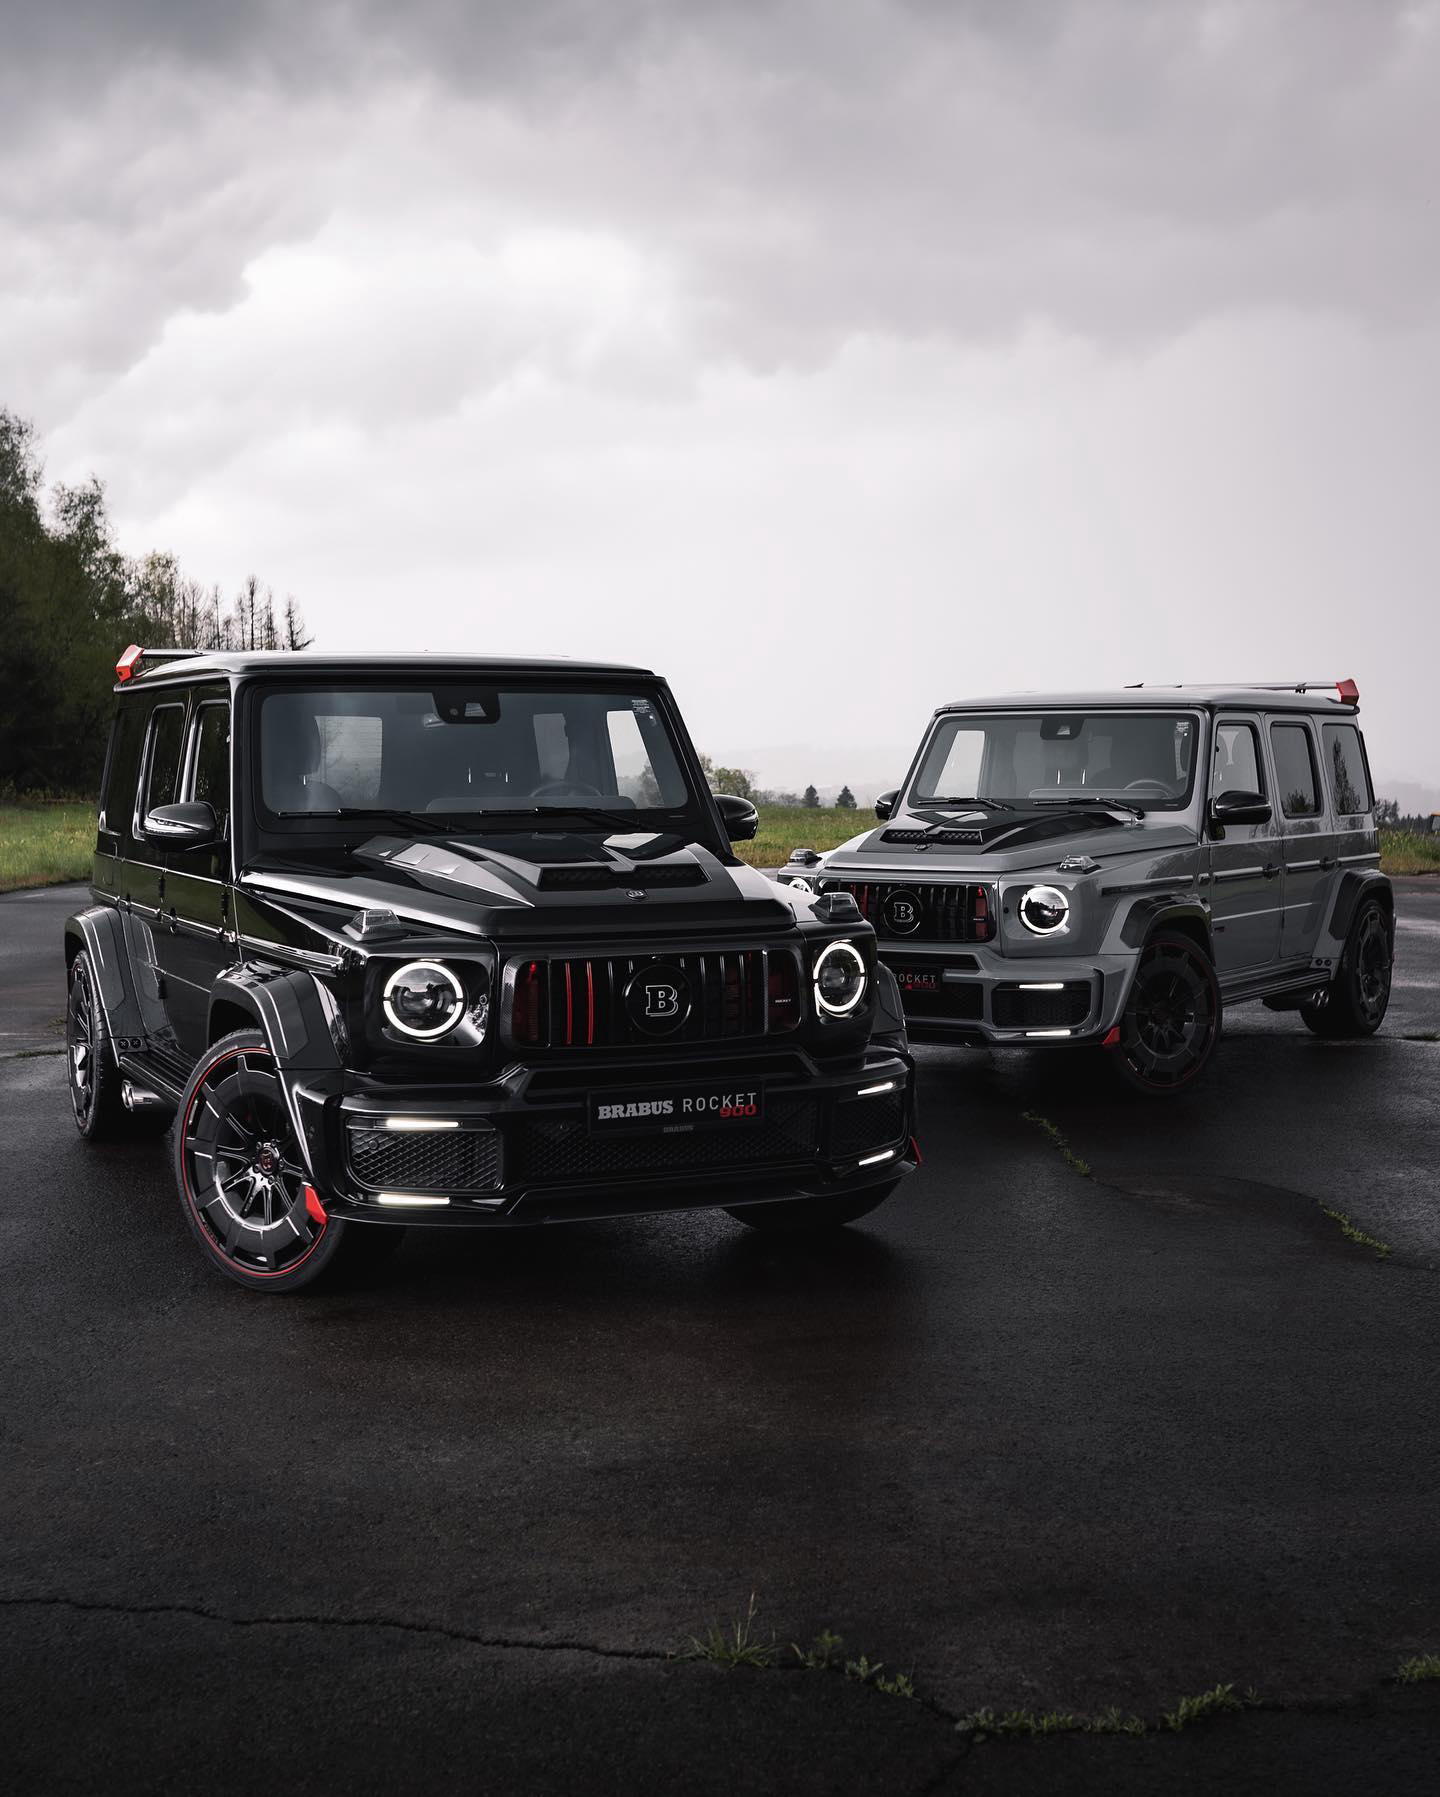 BRABUS - A legacy of high-performance, made in Germany